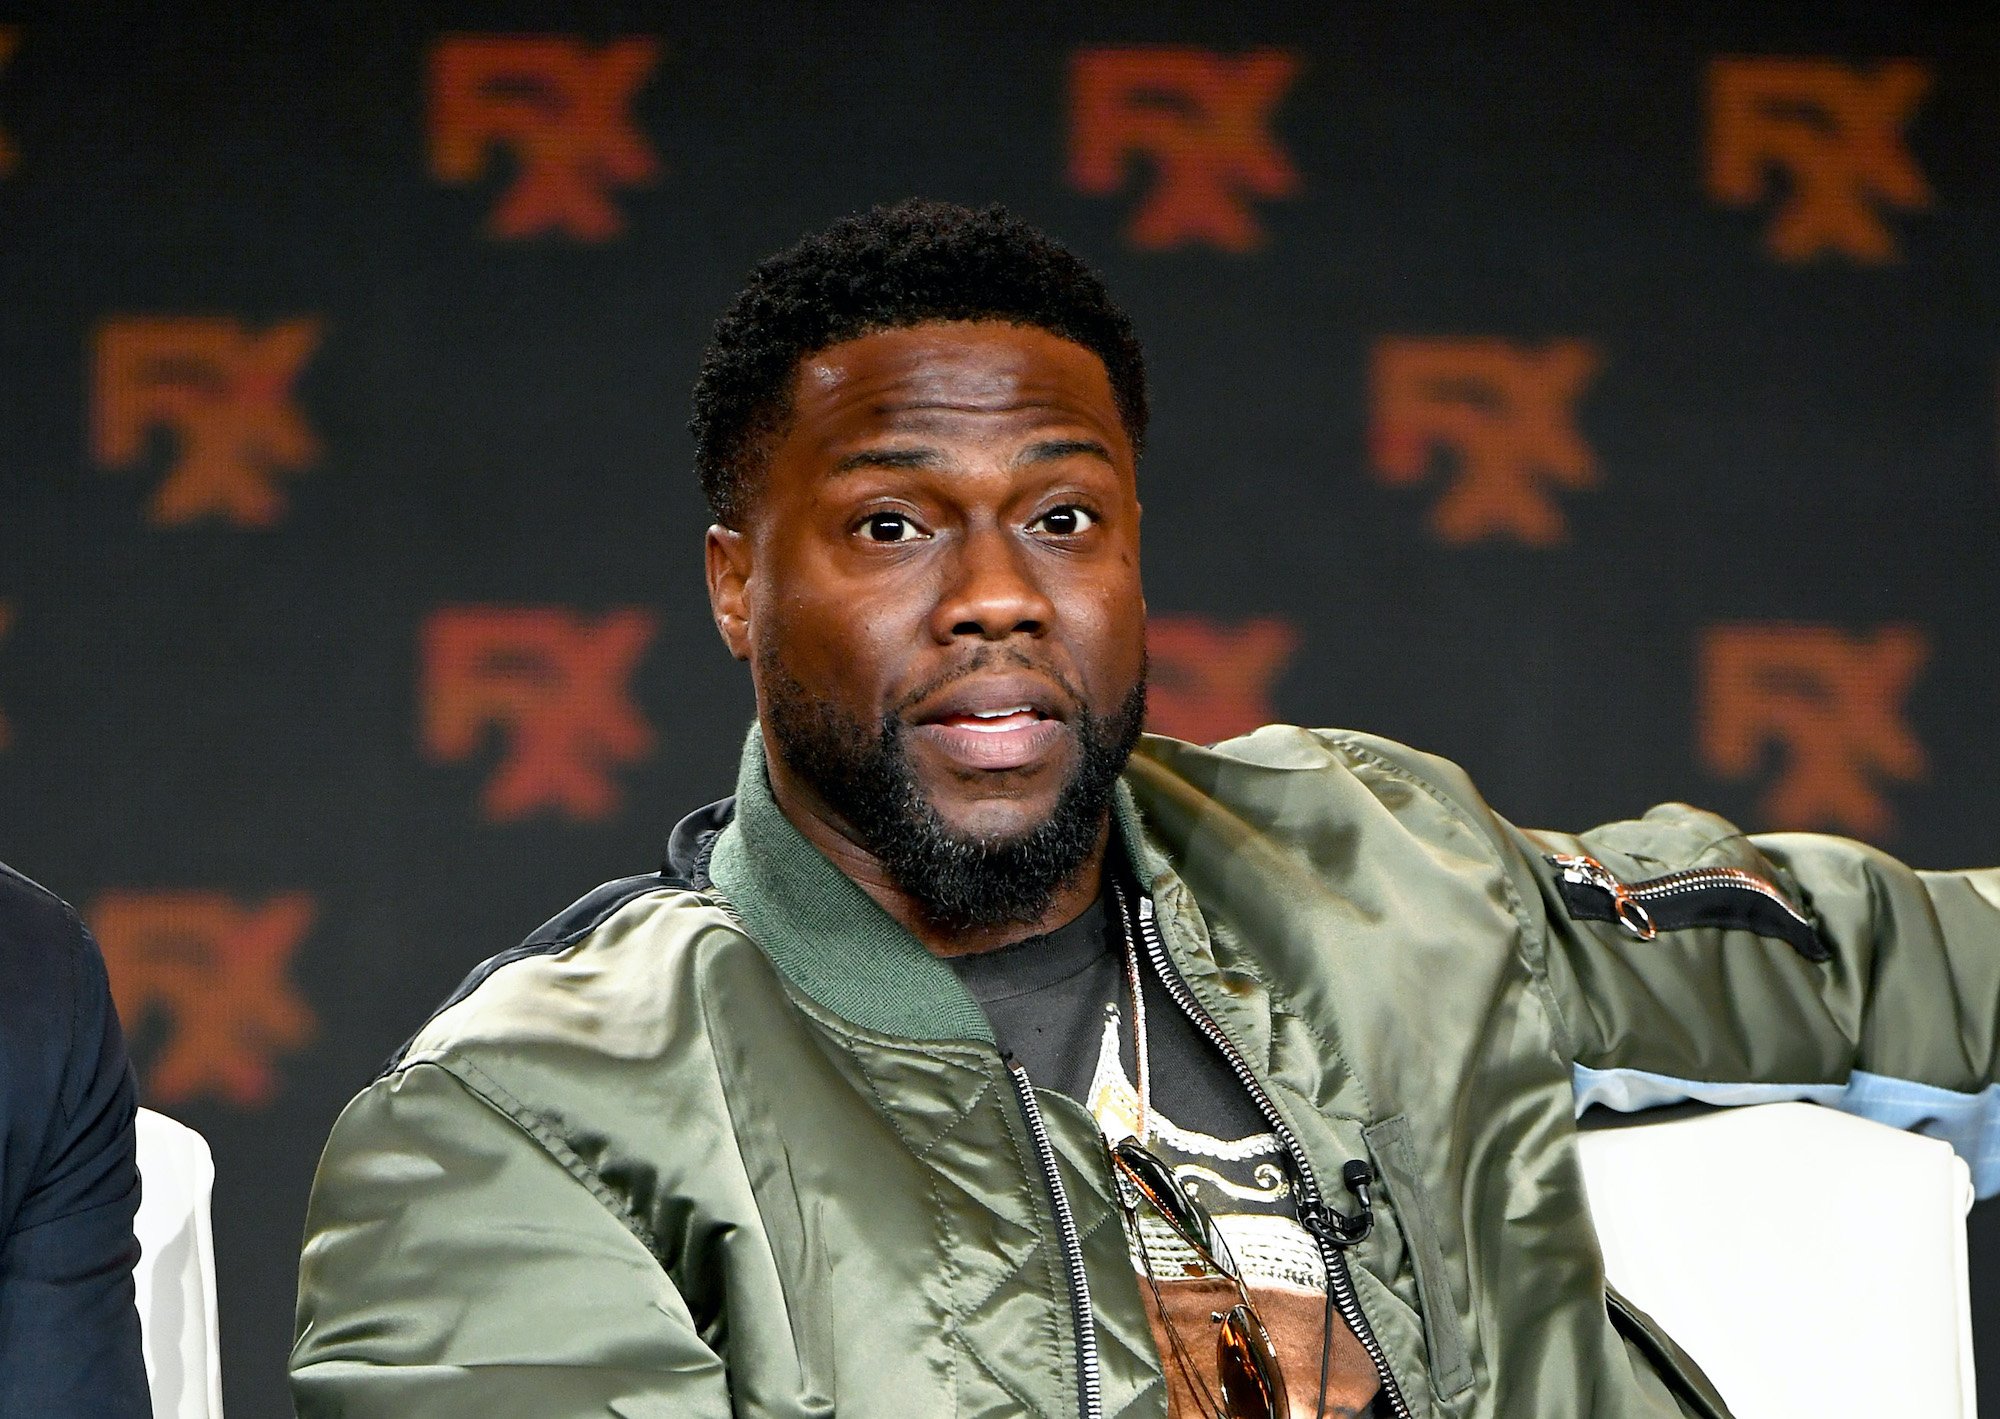 Kevin Hart sitting in front of a black background with repeating logos